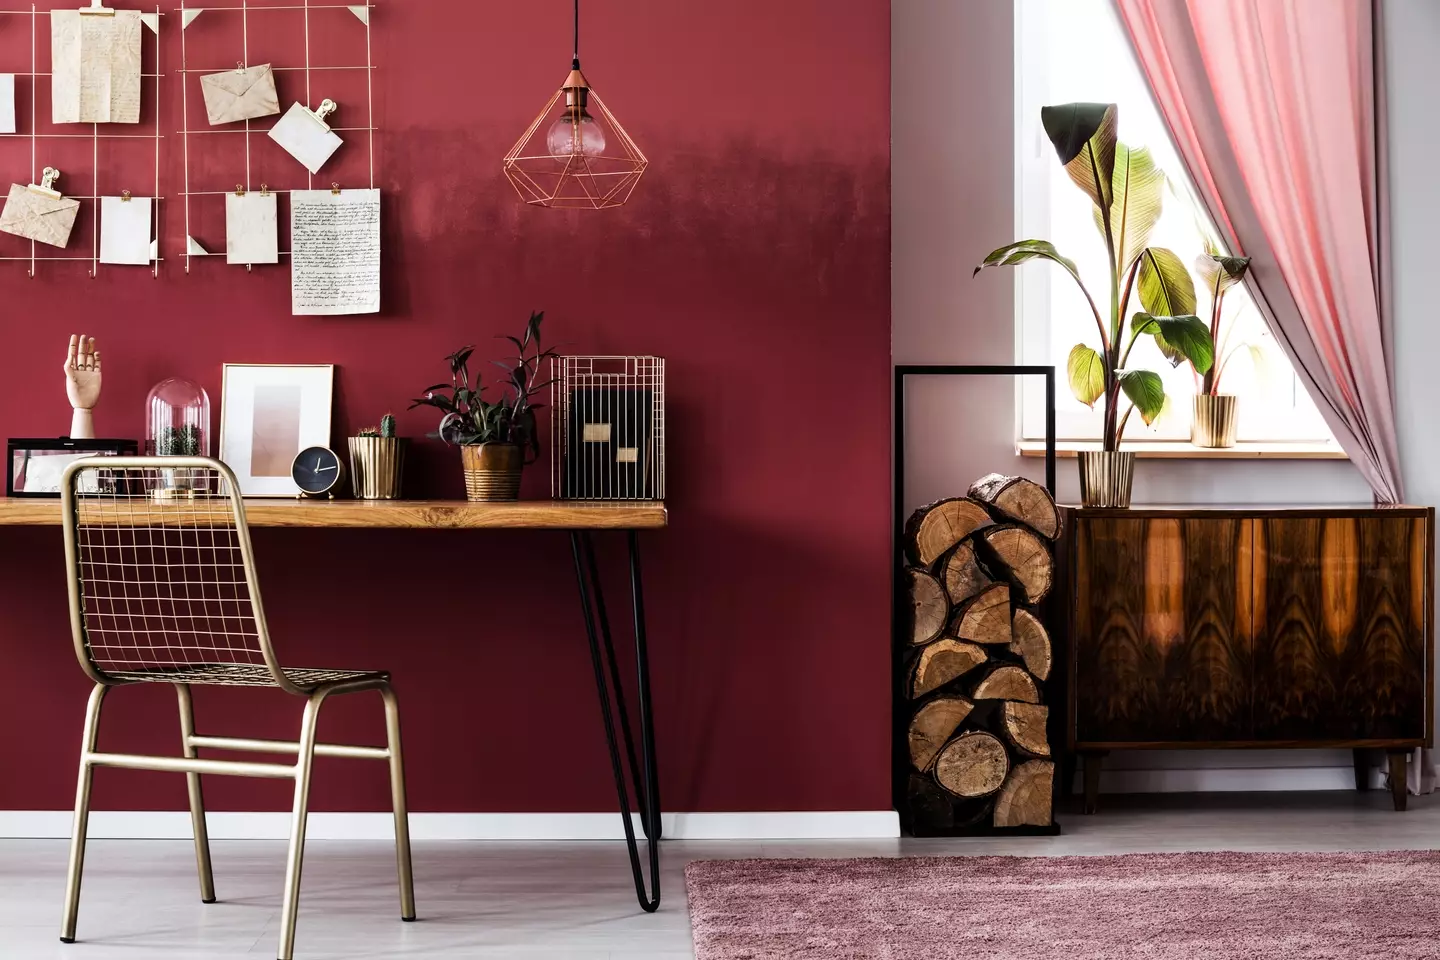 Some rooms will thrive with a red shade whereas elsewhere, it's best to be avoided (